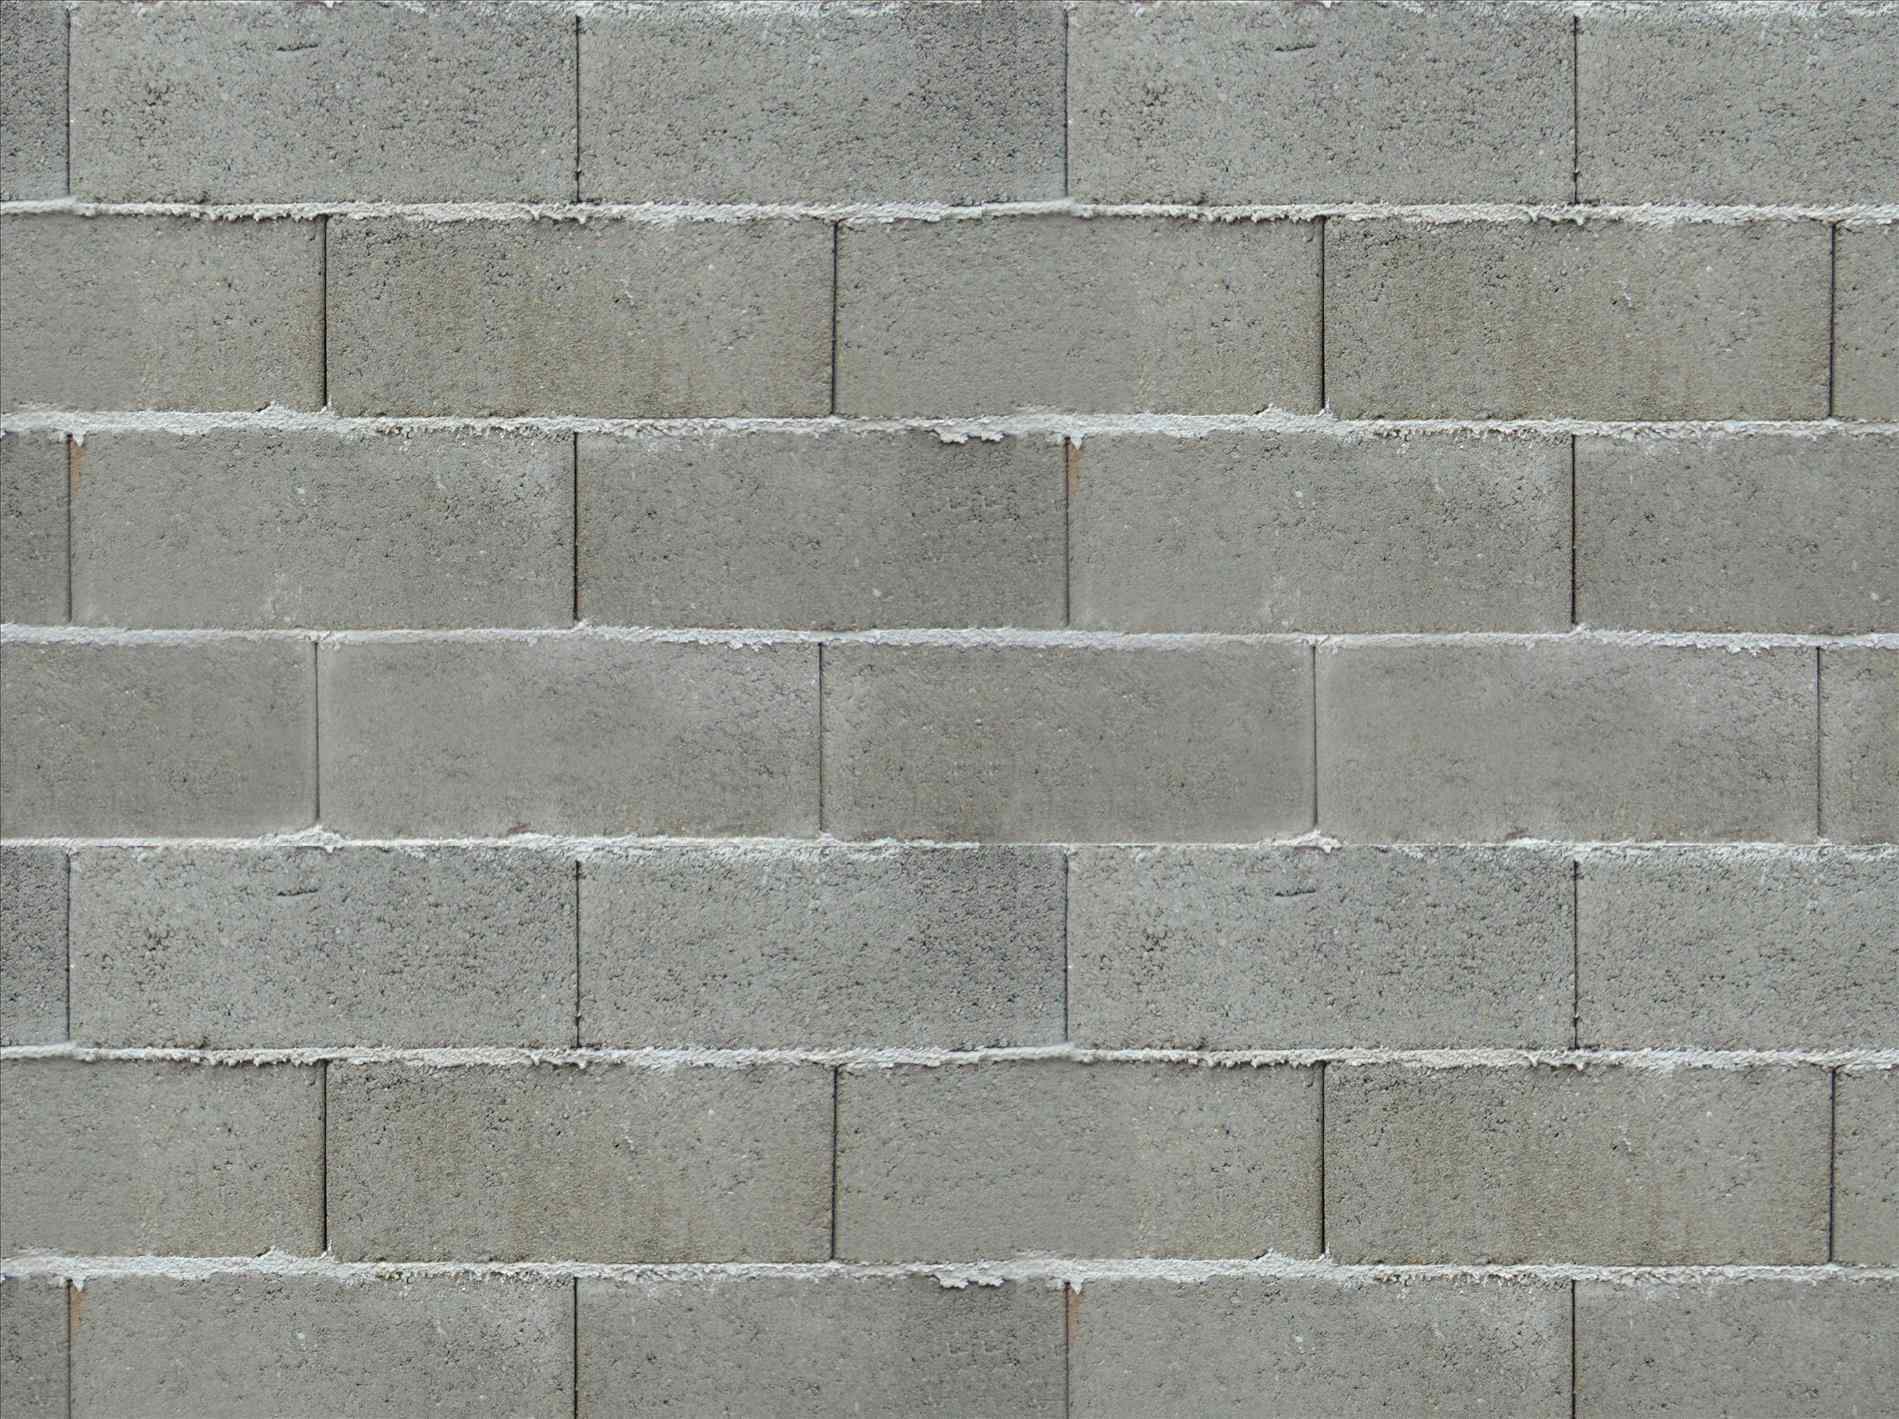 Concrete or cinder block wall texture picture free ...